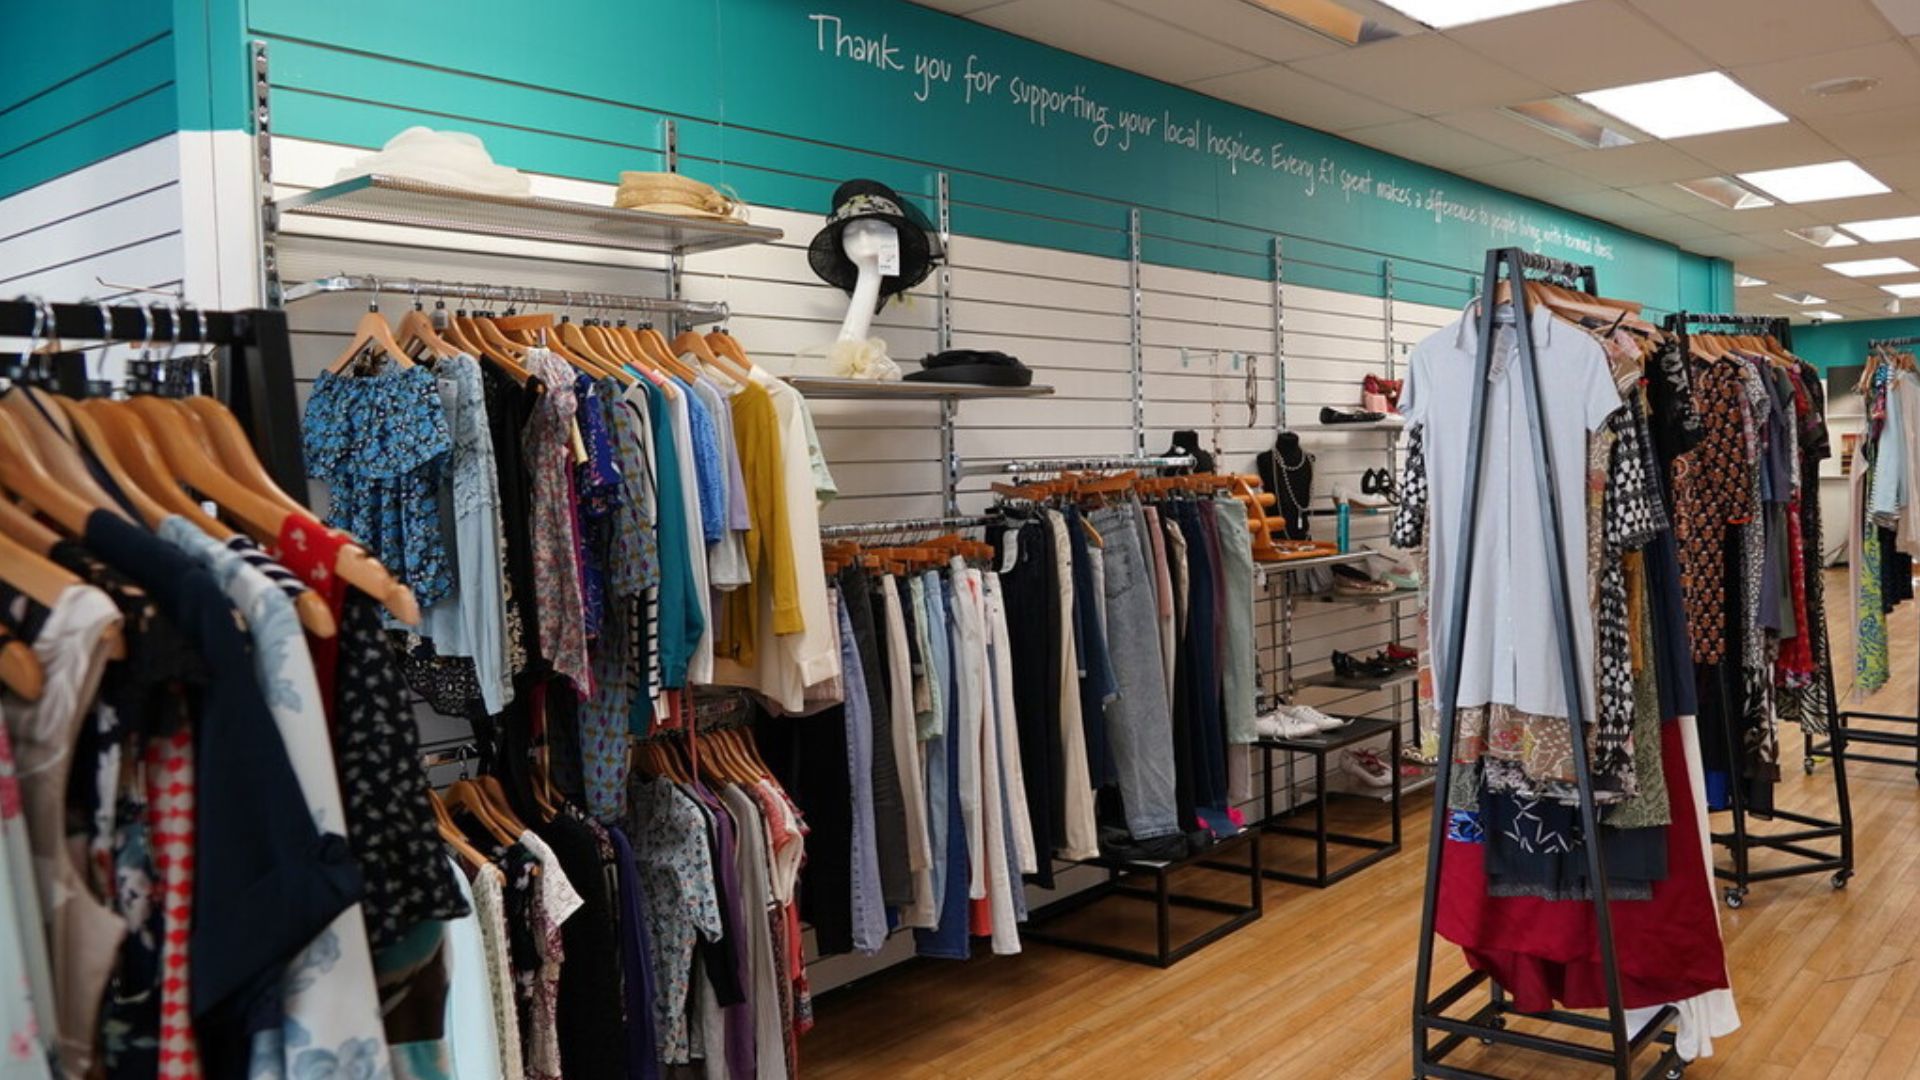 Introducing our new pop-up charity shop in Exeter